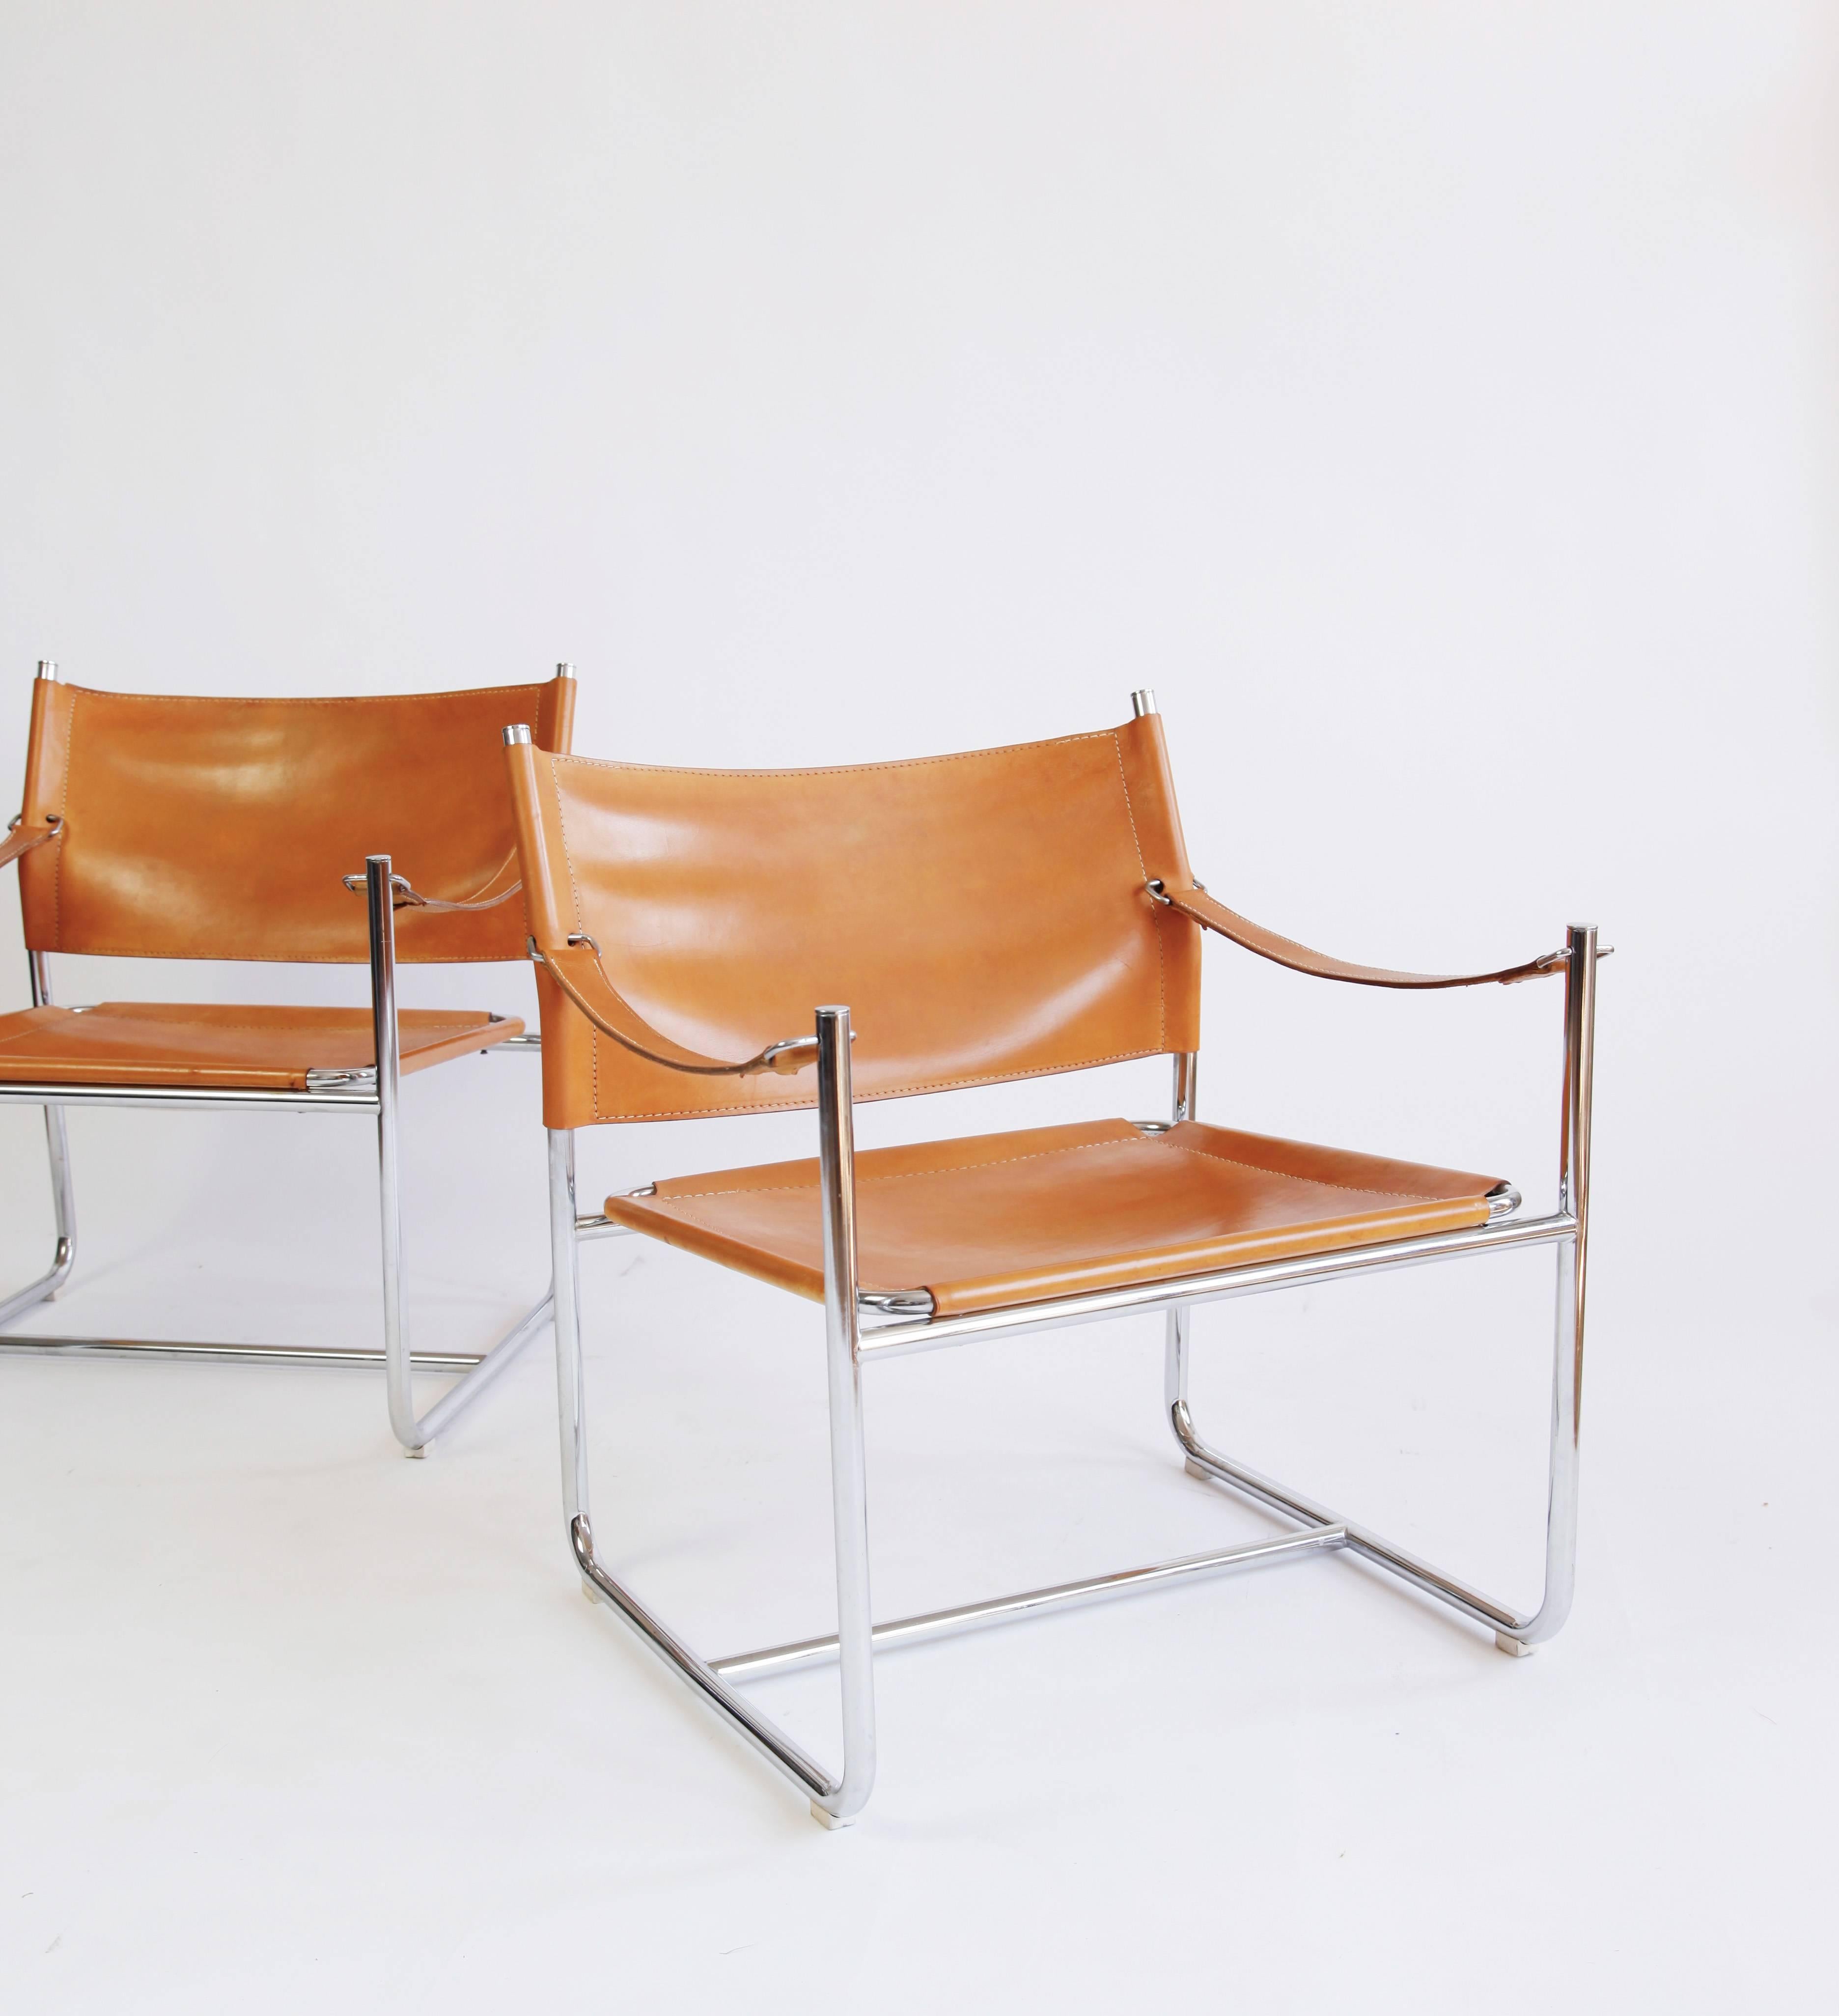 A streamlined pair of leather lounge chairs by Swedish designer Karin Mohbring.